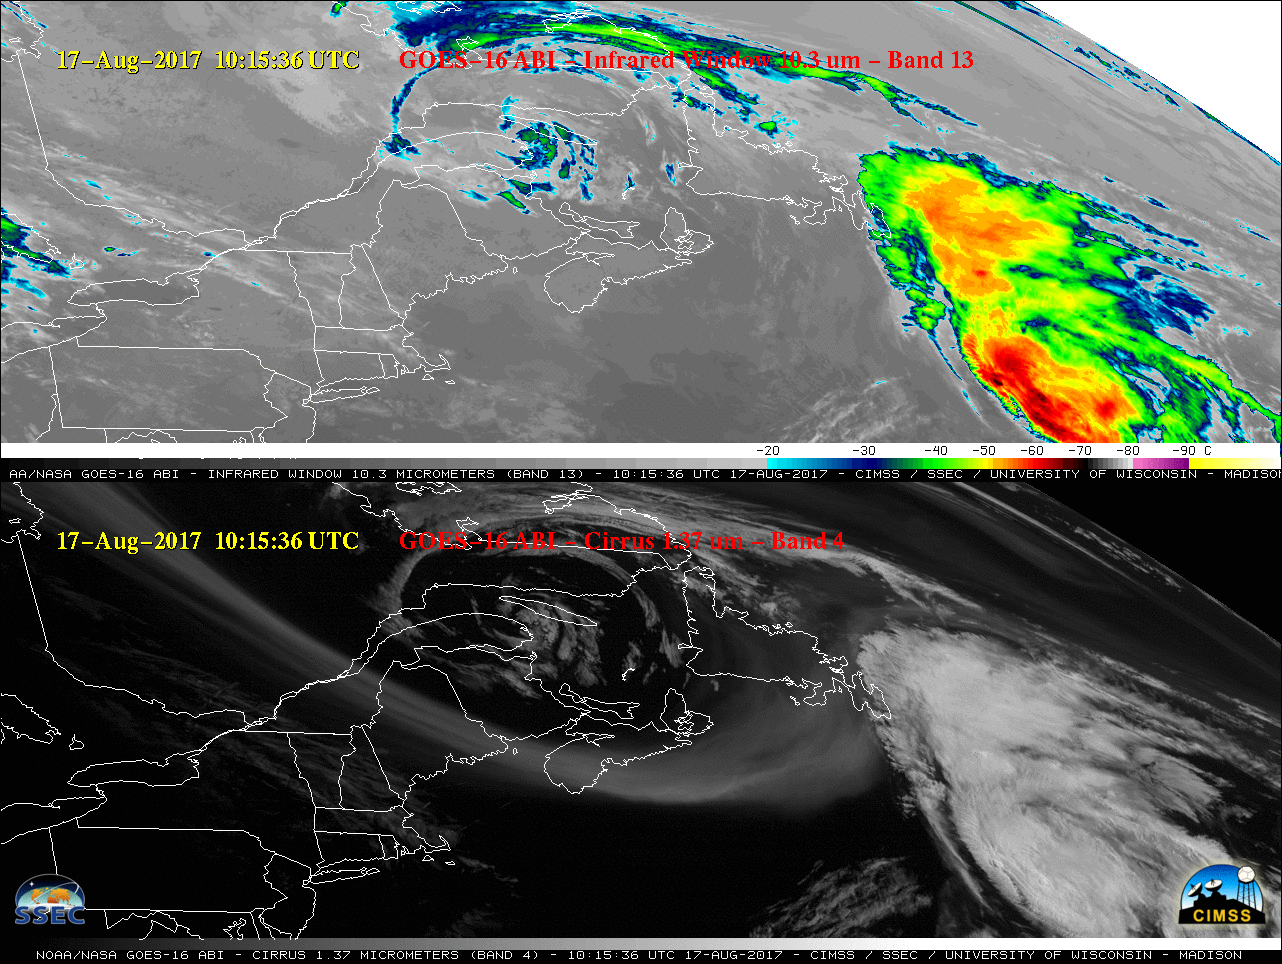 GOES-16 Infrared Window (10.3 µm, top) and Cirrus (1.37 µm, bottom) images [click to play MP4 animation]